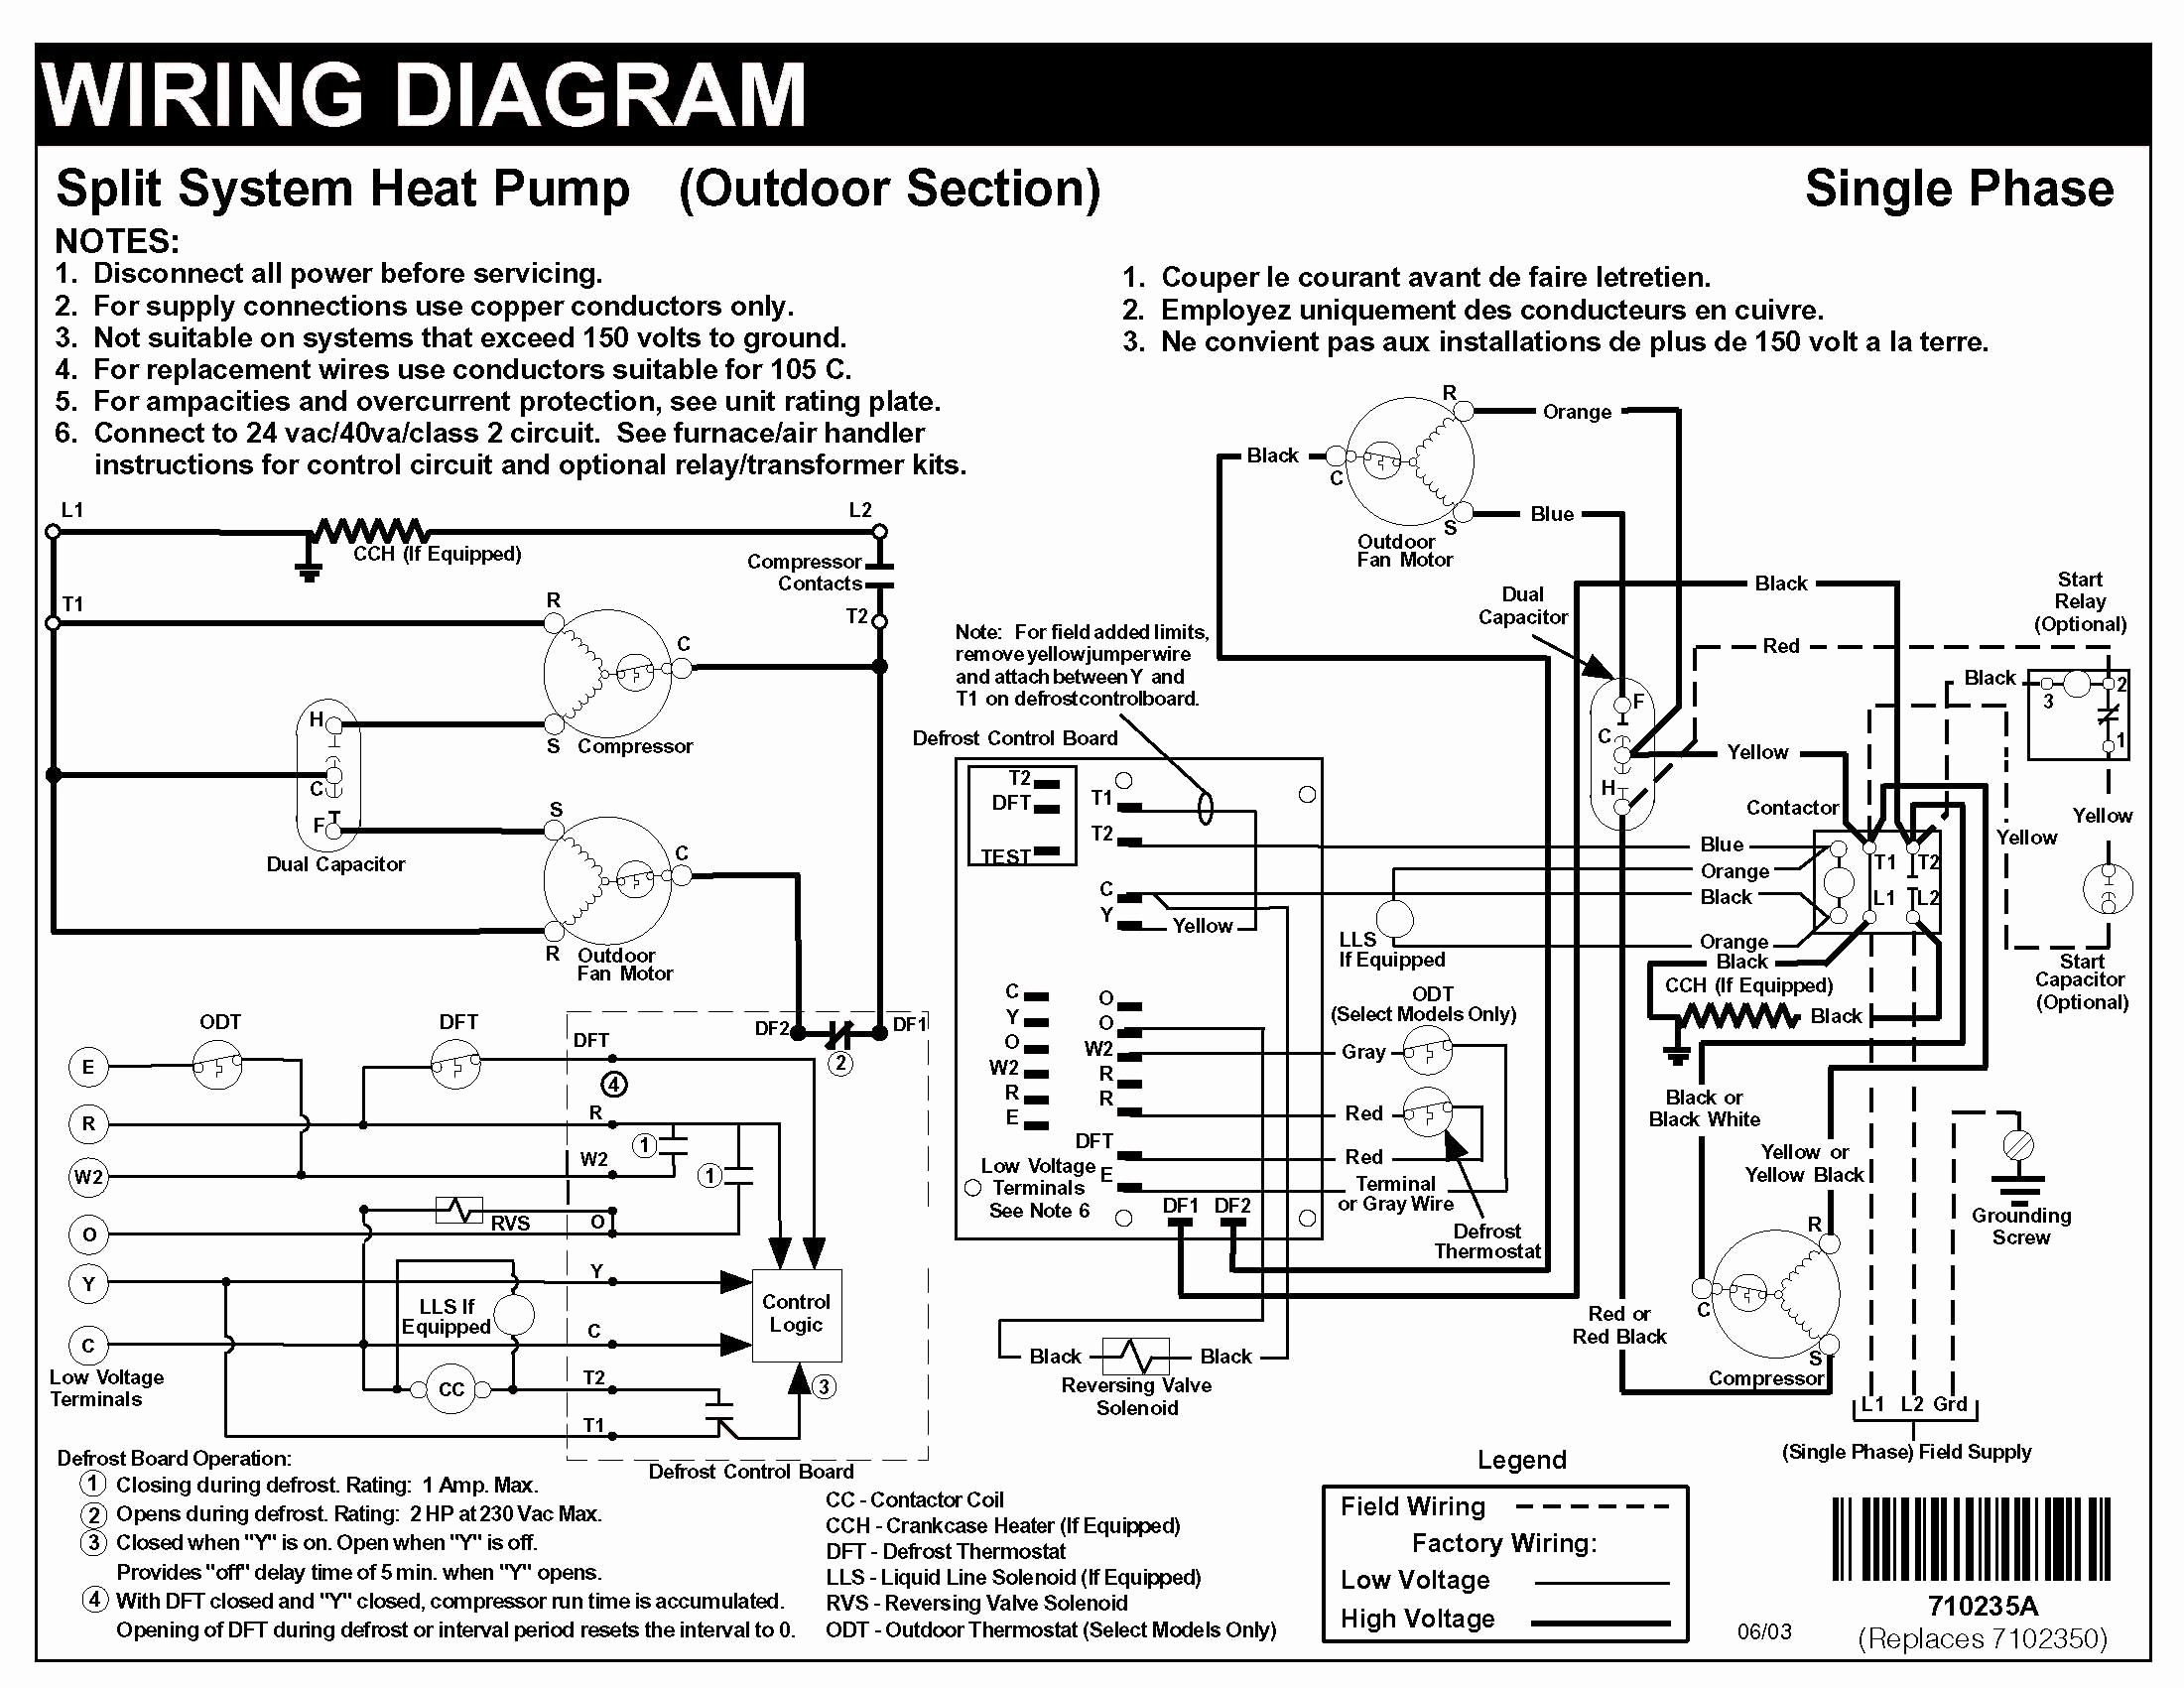 Wiring Diagram Auto Air Conditioning New Wiring Diagram for York Air Conditioner Valid Carrier Air